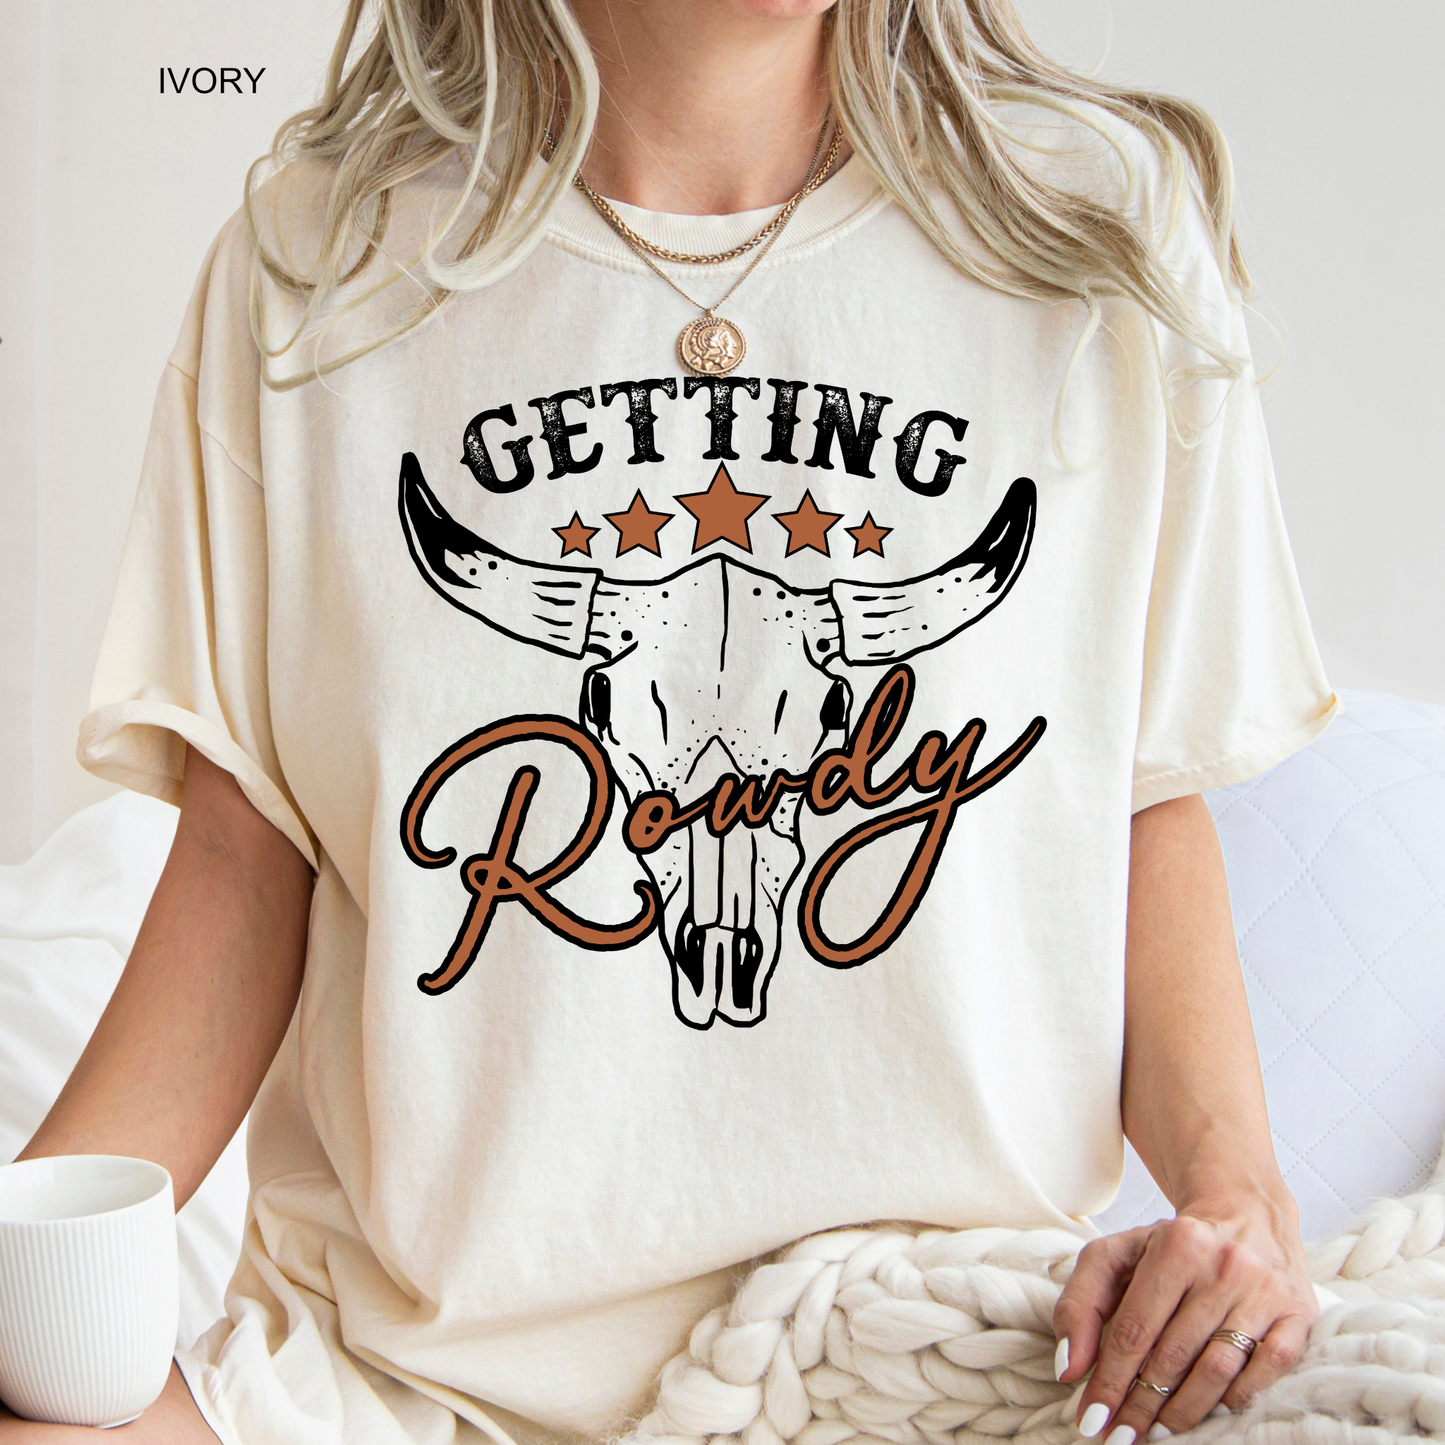 Getting Rowdy | Bridal Party | Bachelorette Party | Comfort Color Short Sleeve Graphic Tees